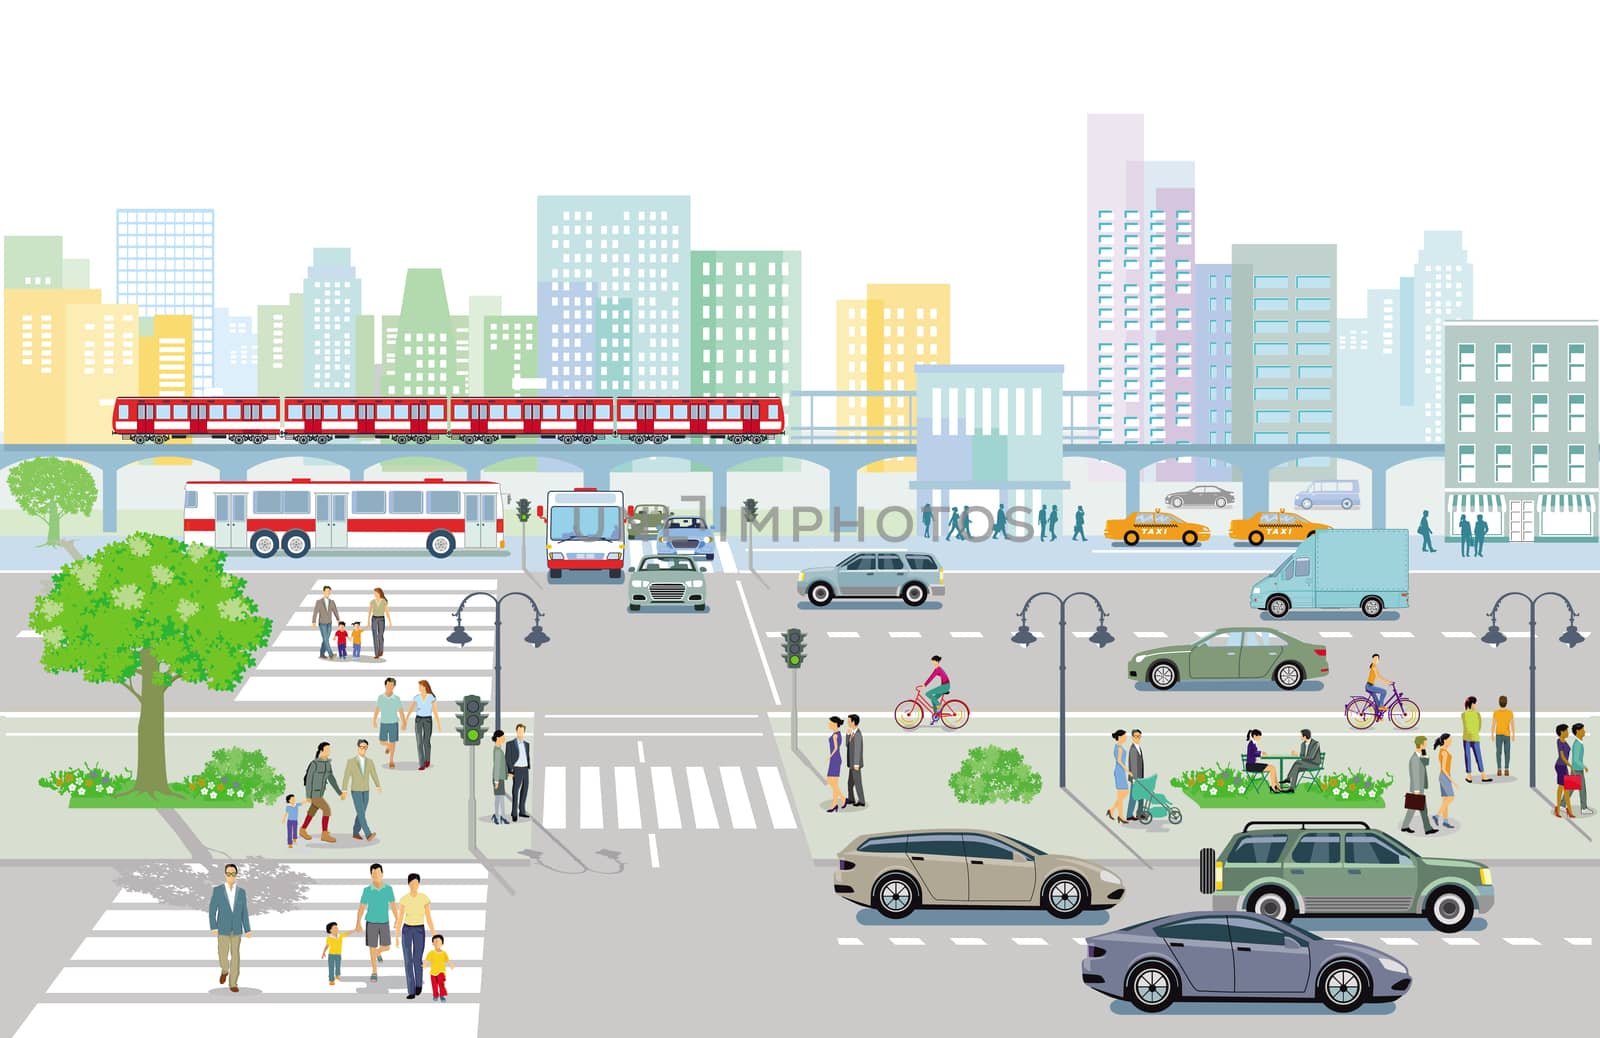 City with traffic and pedestrians on the sidewalk by scusi